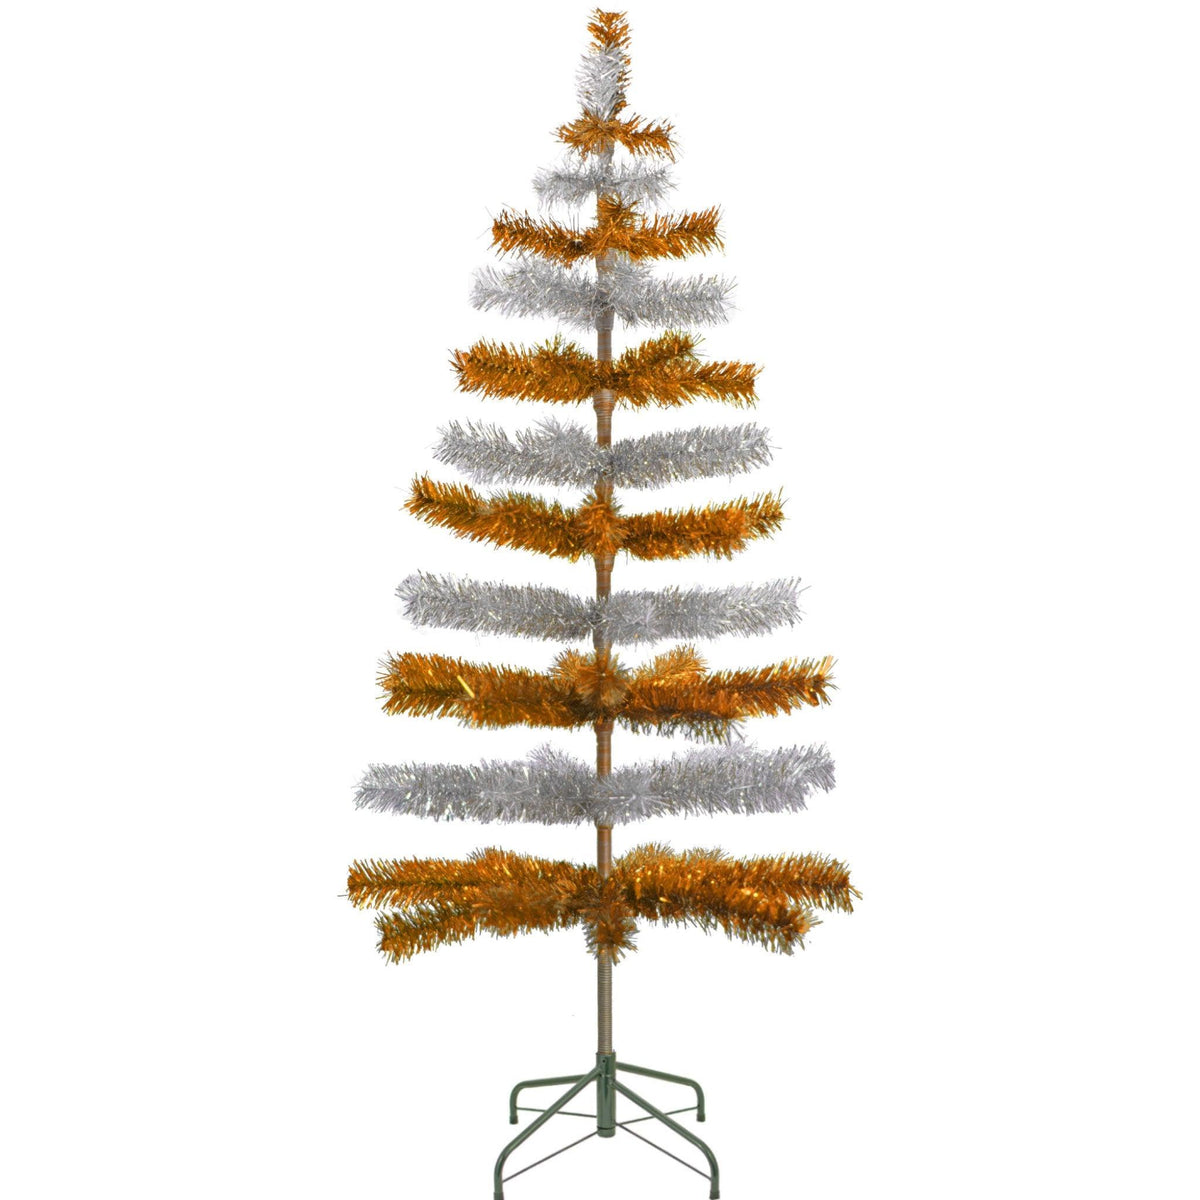 Orange & Silver Layered Tinsel Christmas Trees! Decorate for the holidays with a Shiny Orange and Metallic Silver retro-style Christmas Tree. On sale now at leedisplay.com